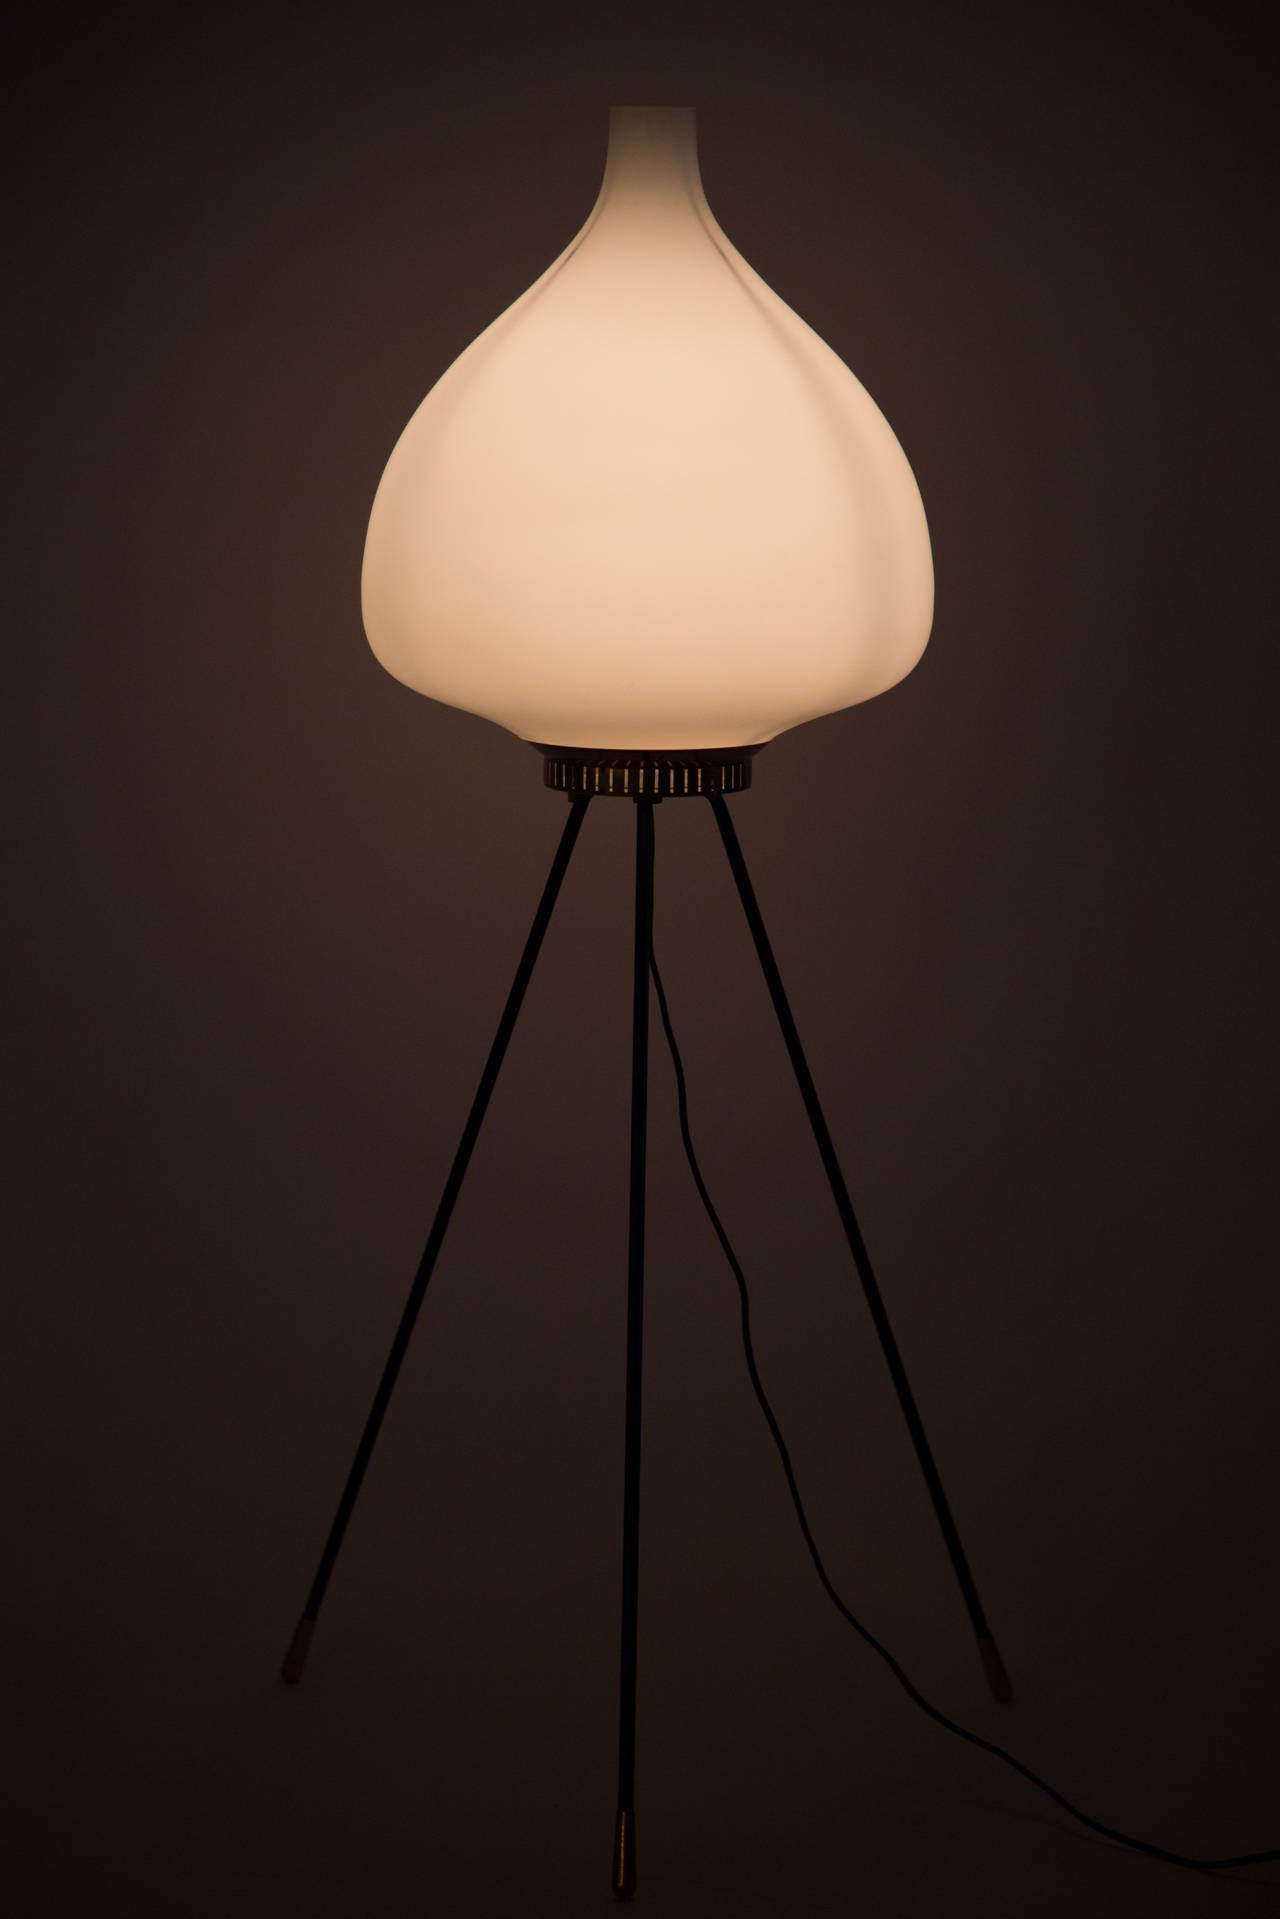 A tripod standing floor lamp with opaline glass globe